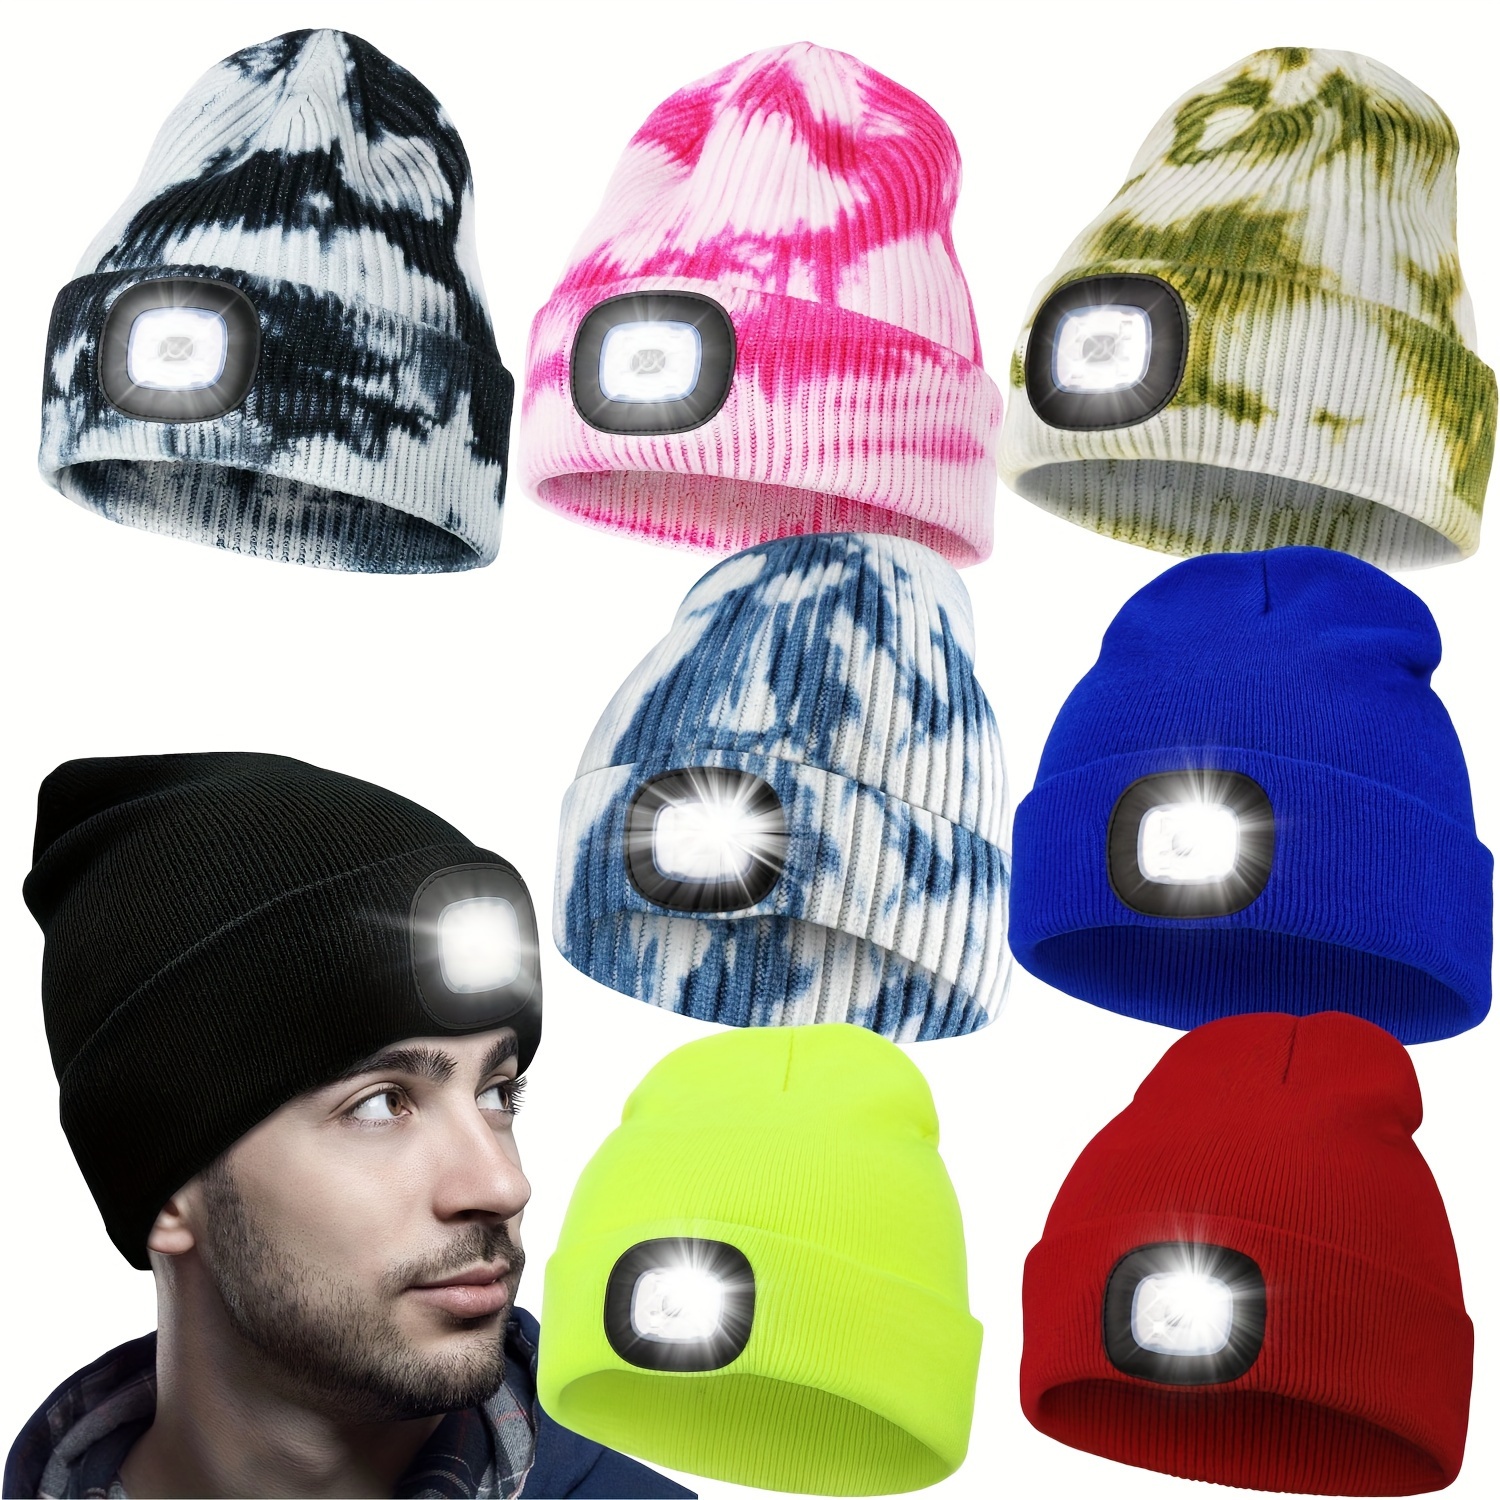 

1pc Usb Rechargeable Led Beanie Hat With 4 Lights - Unisex Knitted Cap For Hiking, Biking, Camping, Walking, And Running - Perfect Gift For Men And Women